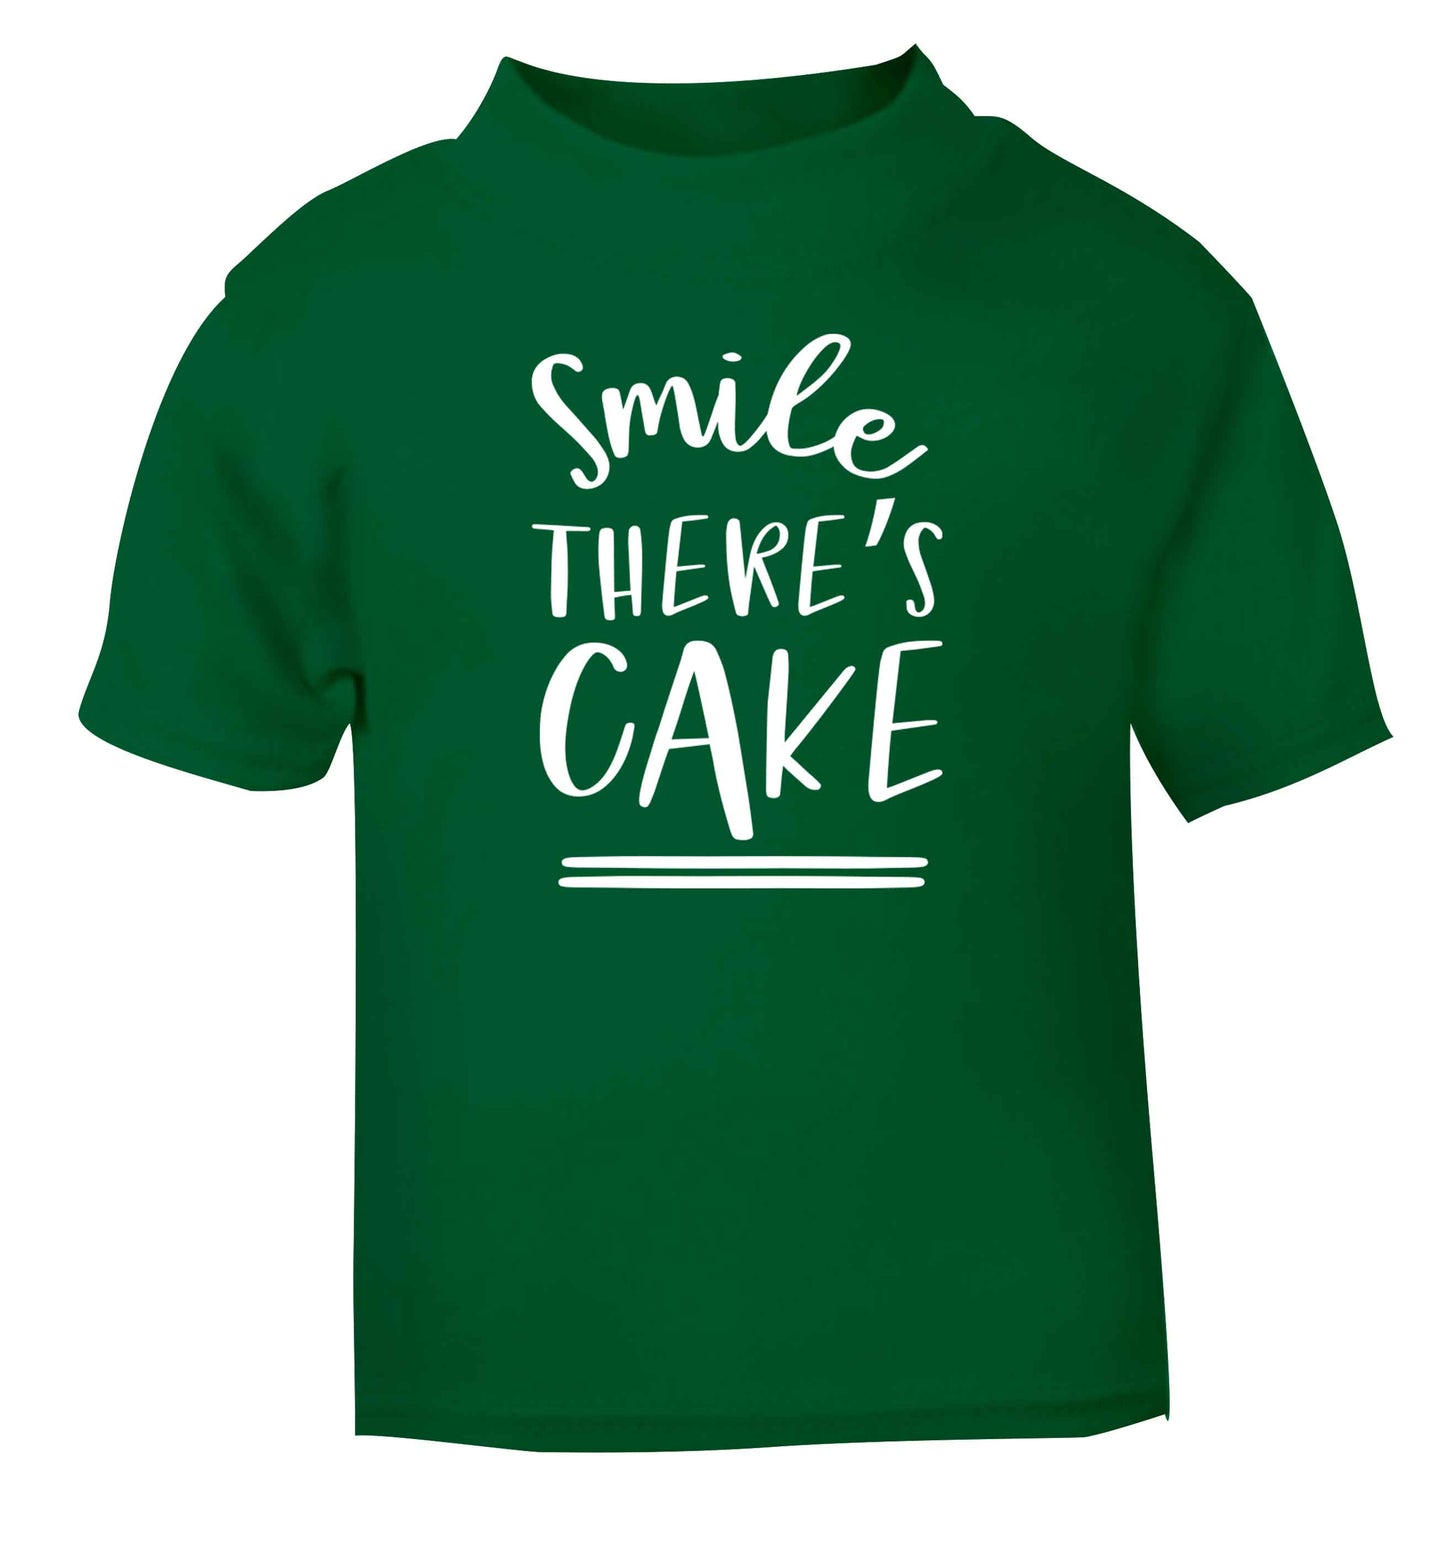 Smile there's cake green Baby Toddler Tshirt 2 Years